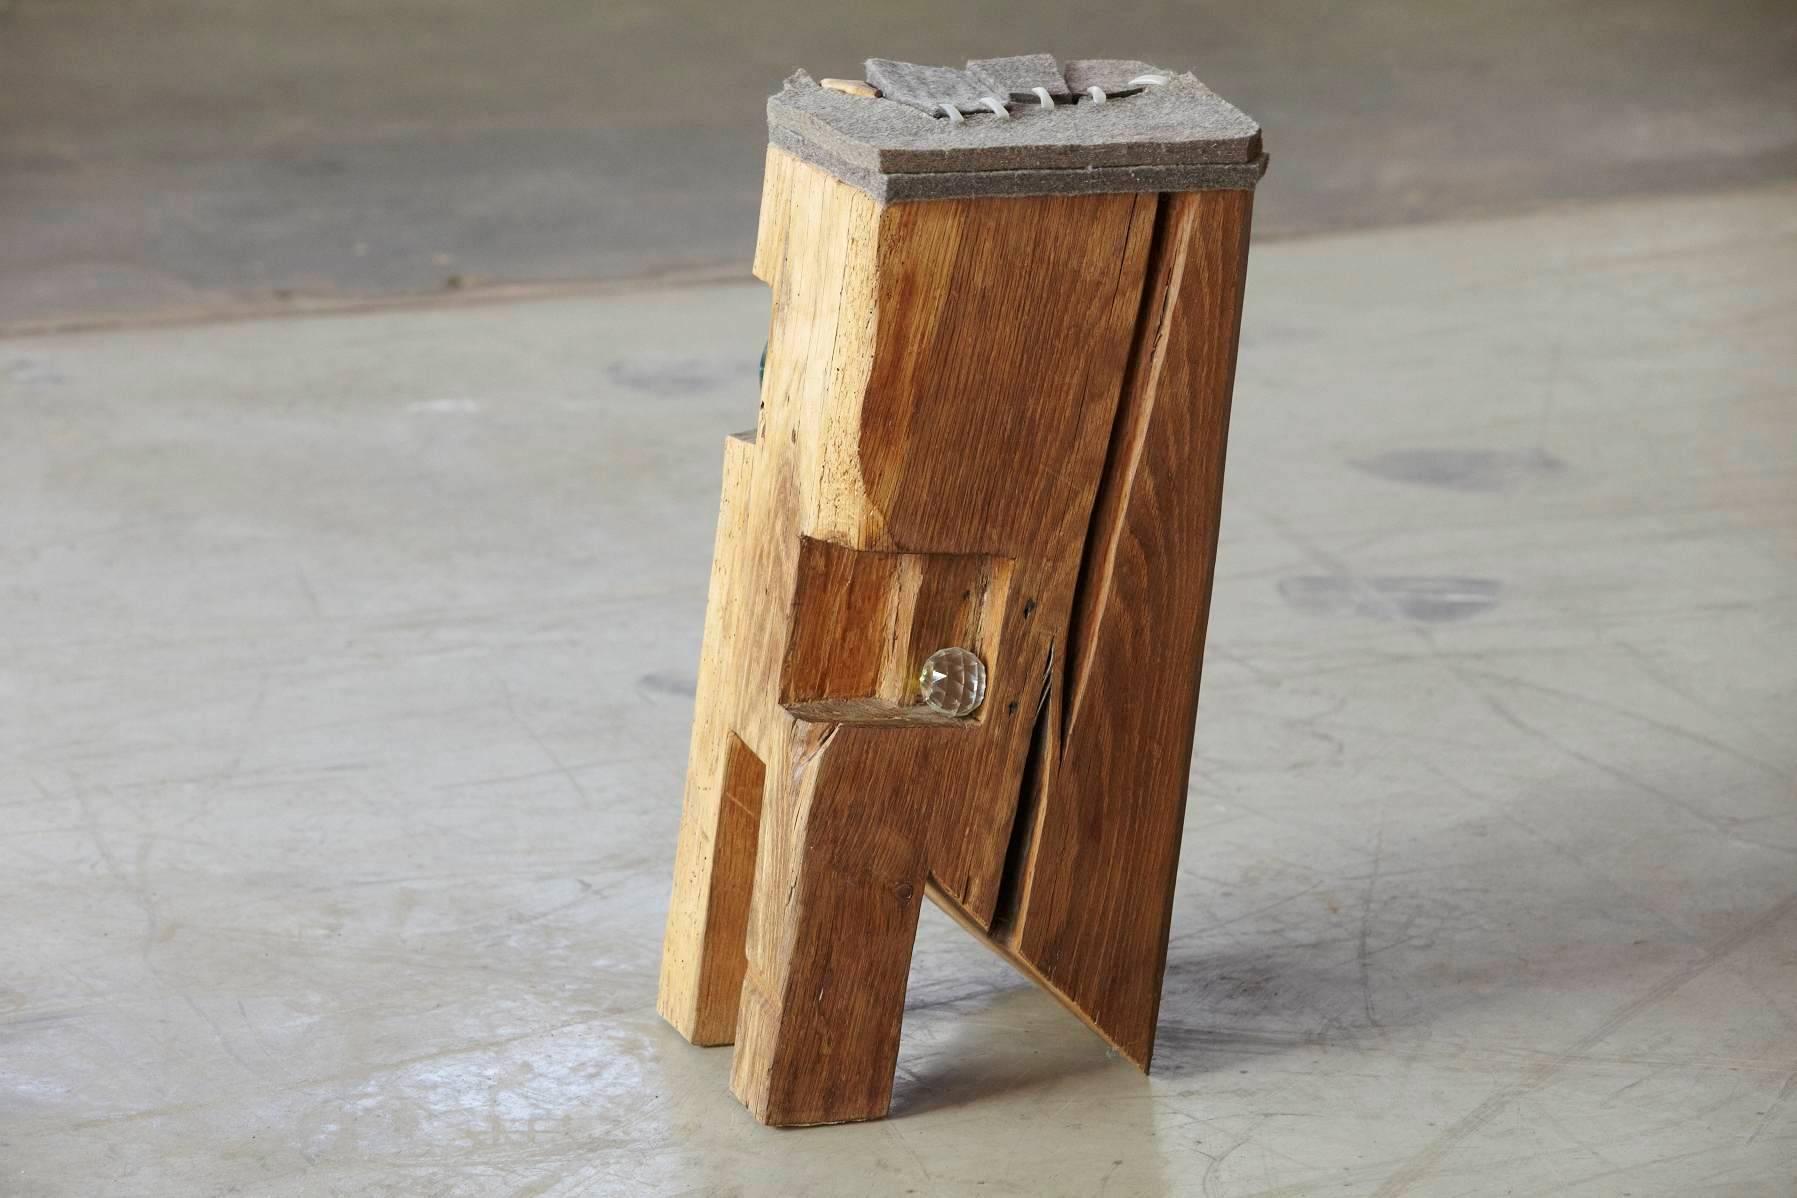 German Filz - Stool by Hanni Dietrich - Carved Oak with Felt and Glass For Sale